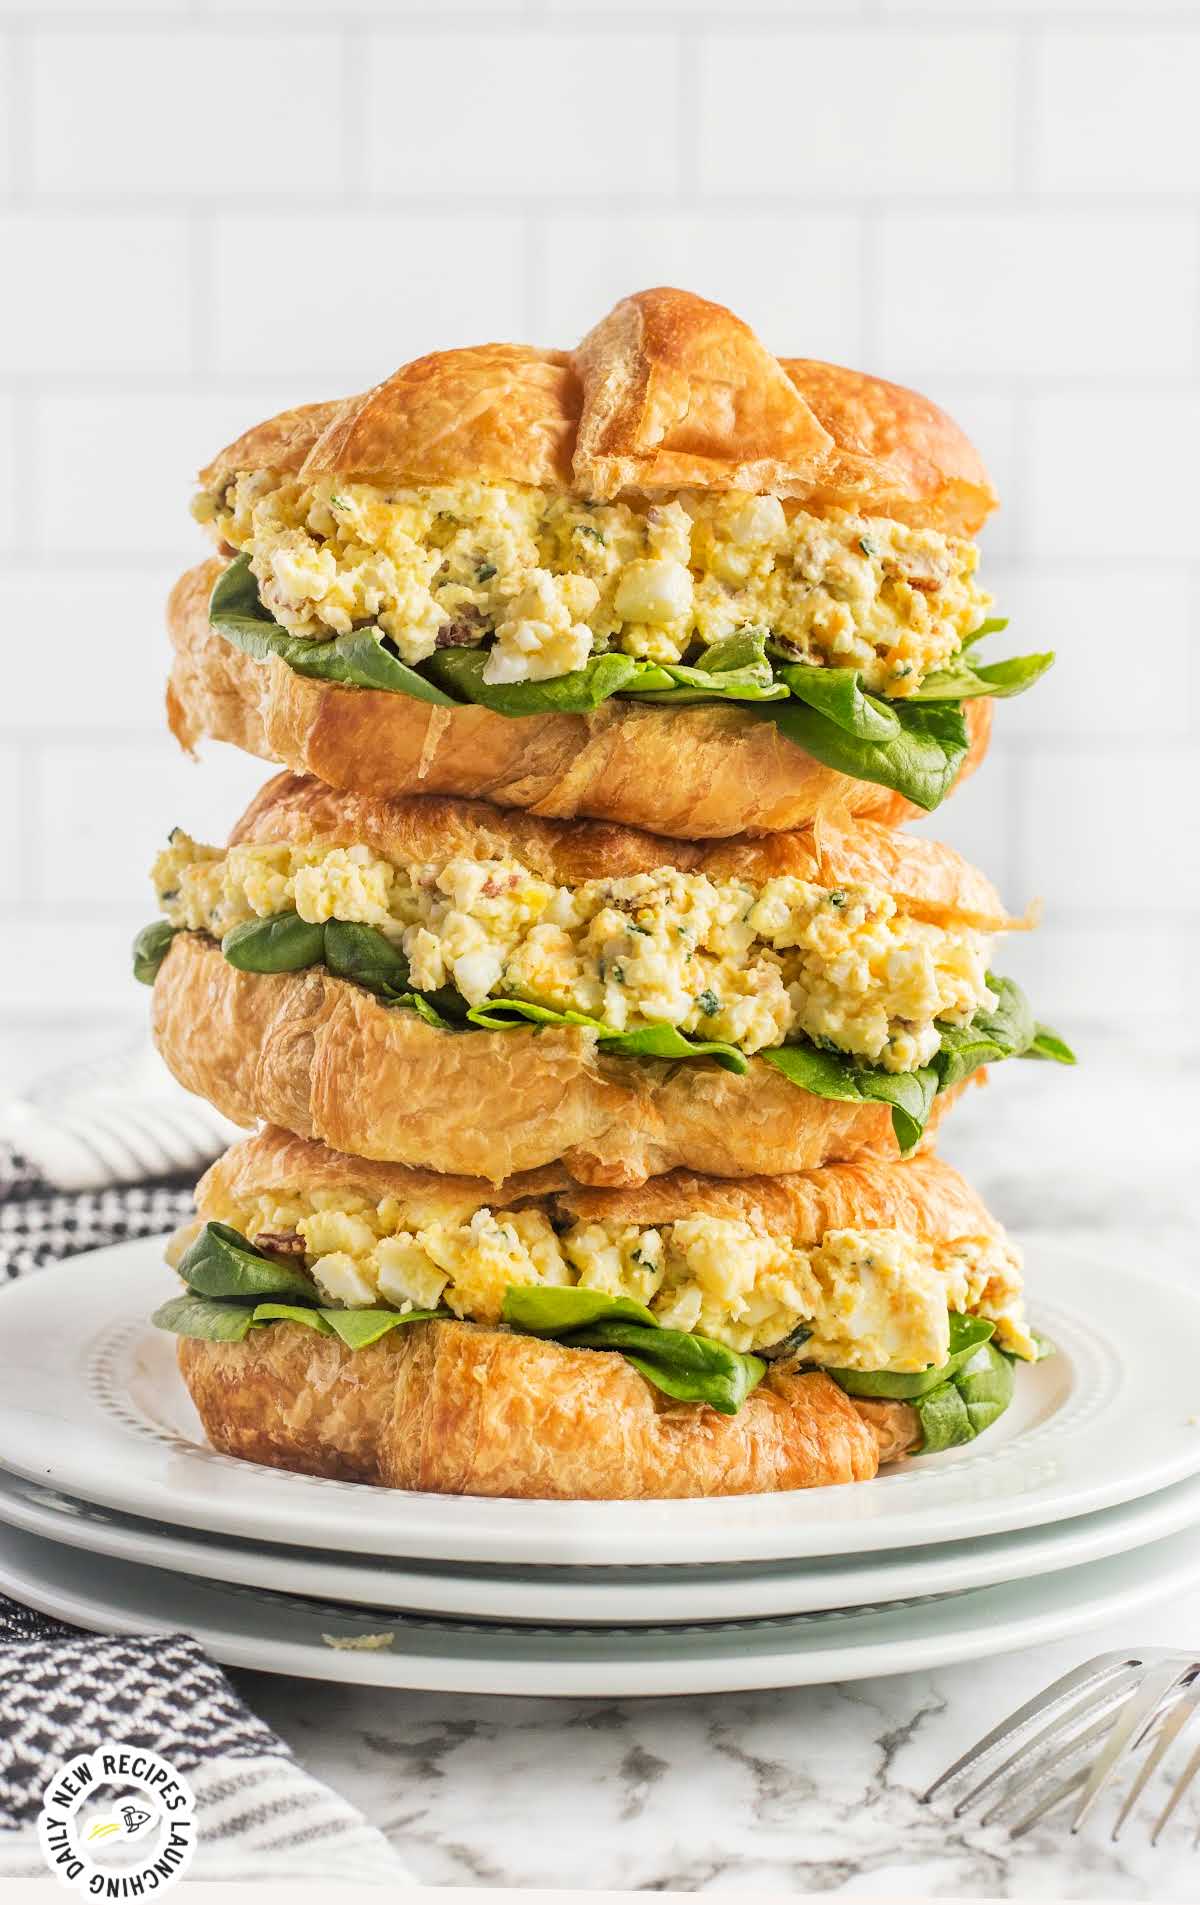 Egg Salad Sandwich stacked on top of each other on a plate